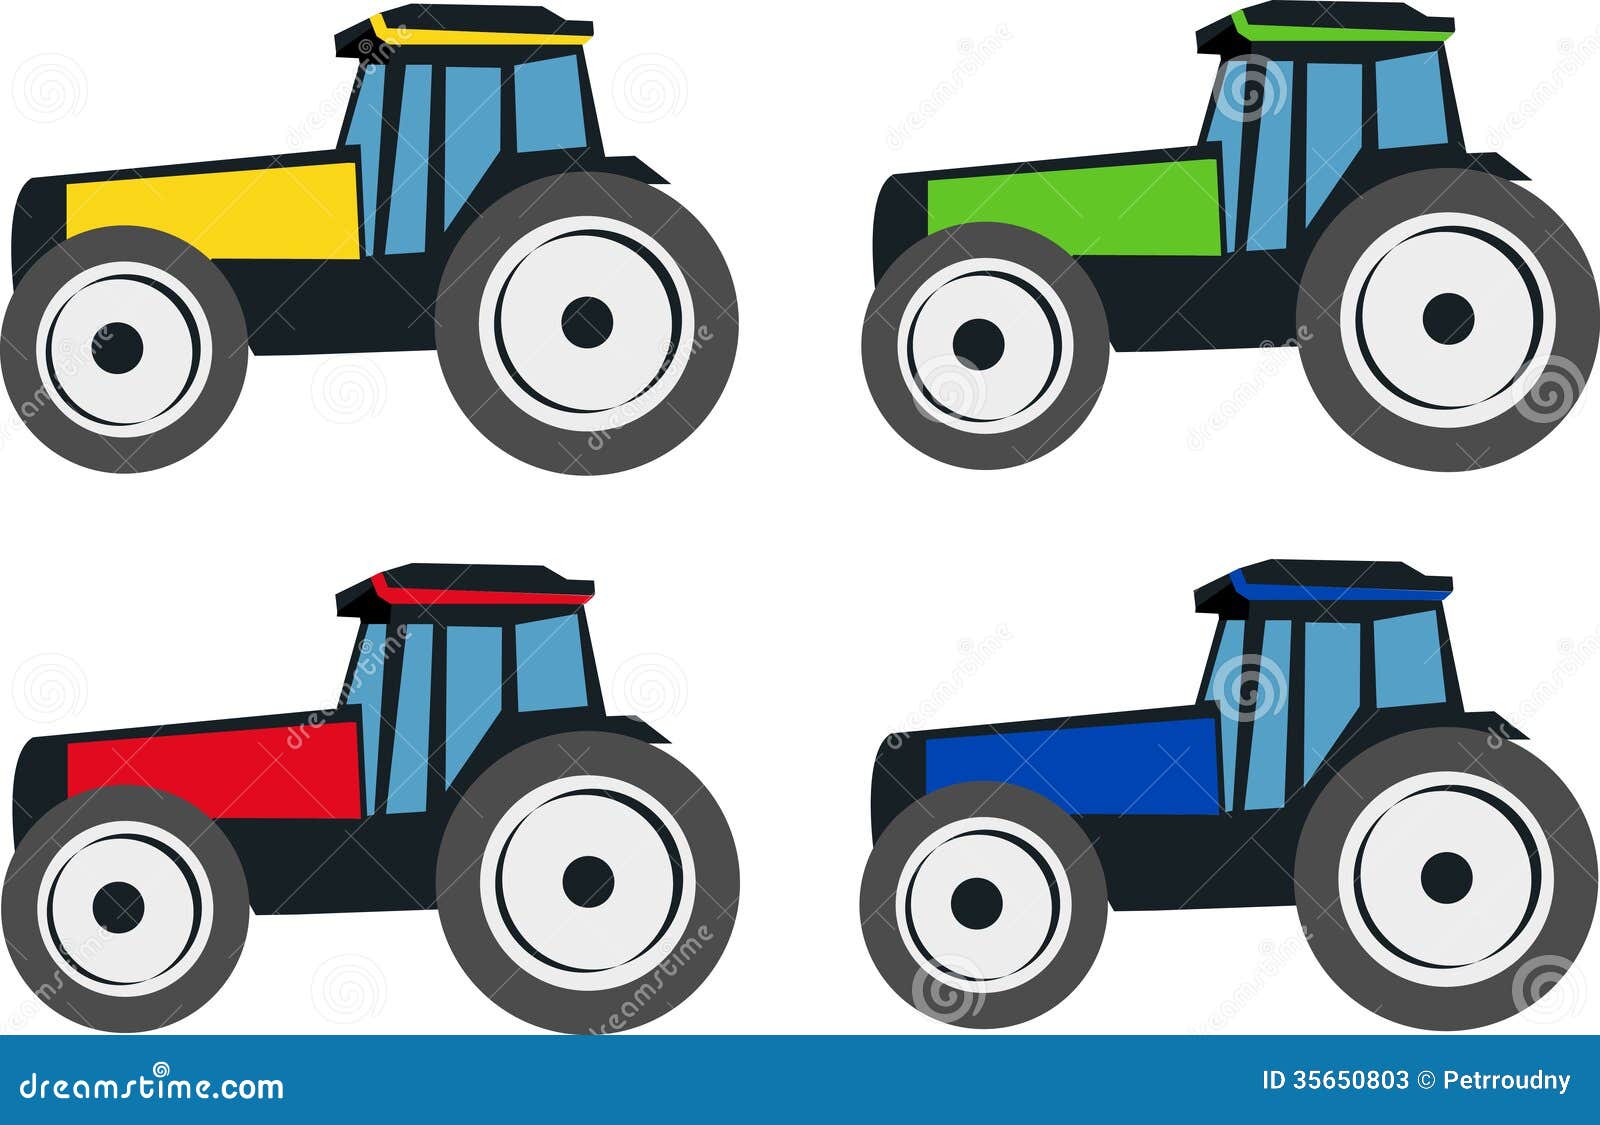 yellow tractor clipart - photo #30